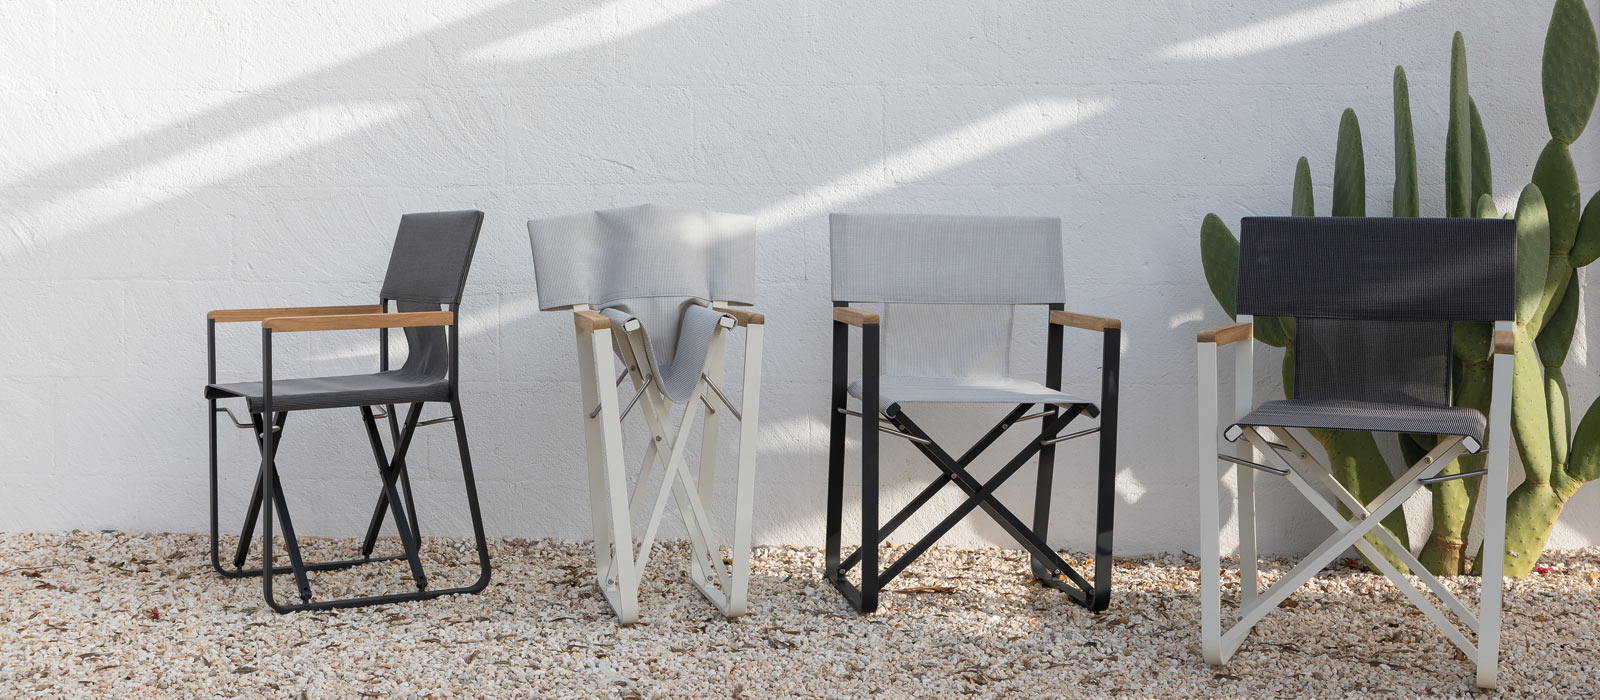 Garden chairs and small armchairs - Unopiù - 6